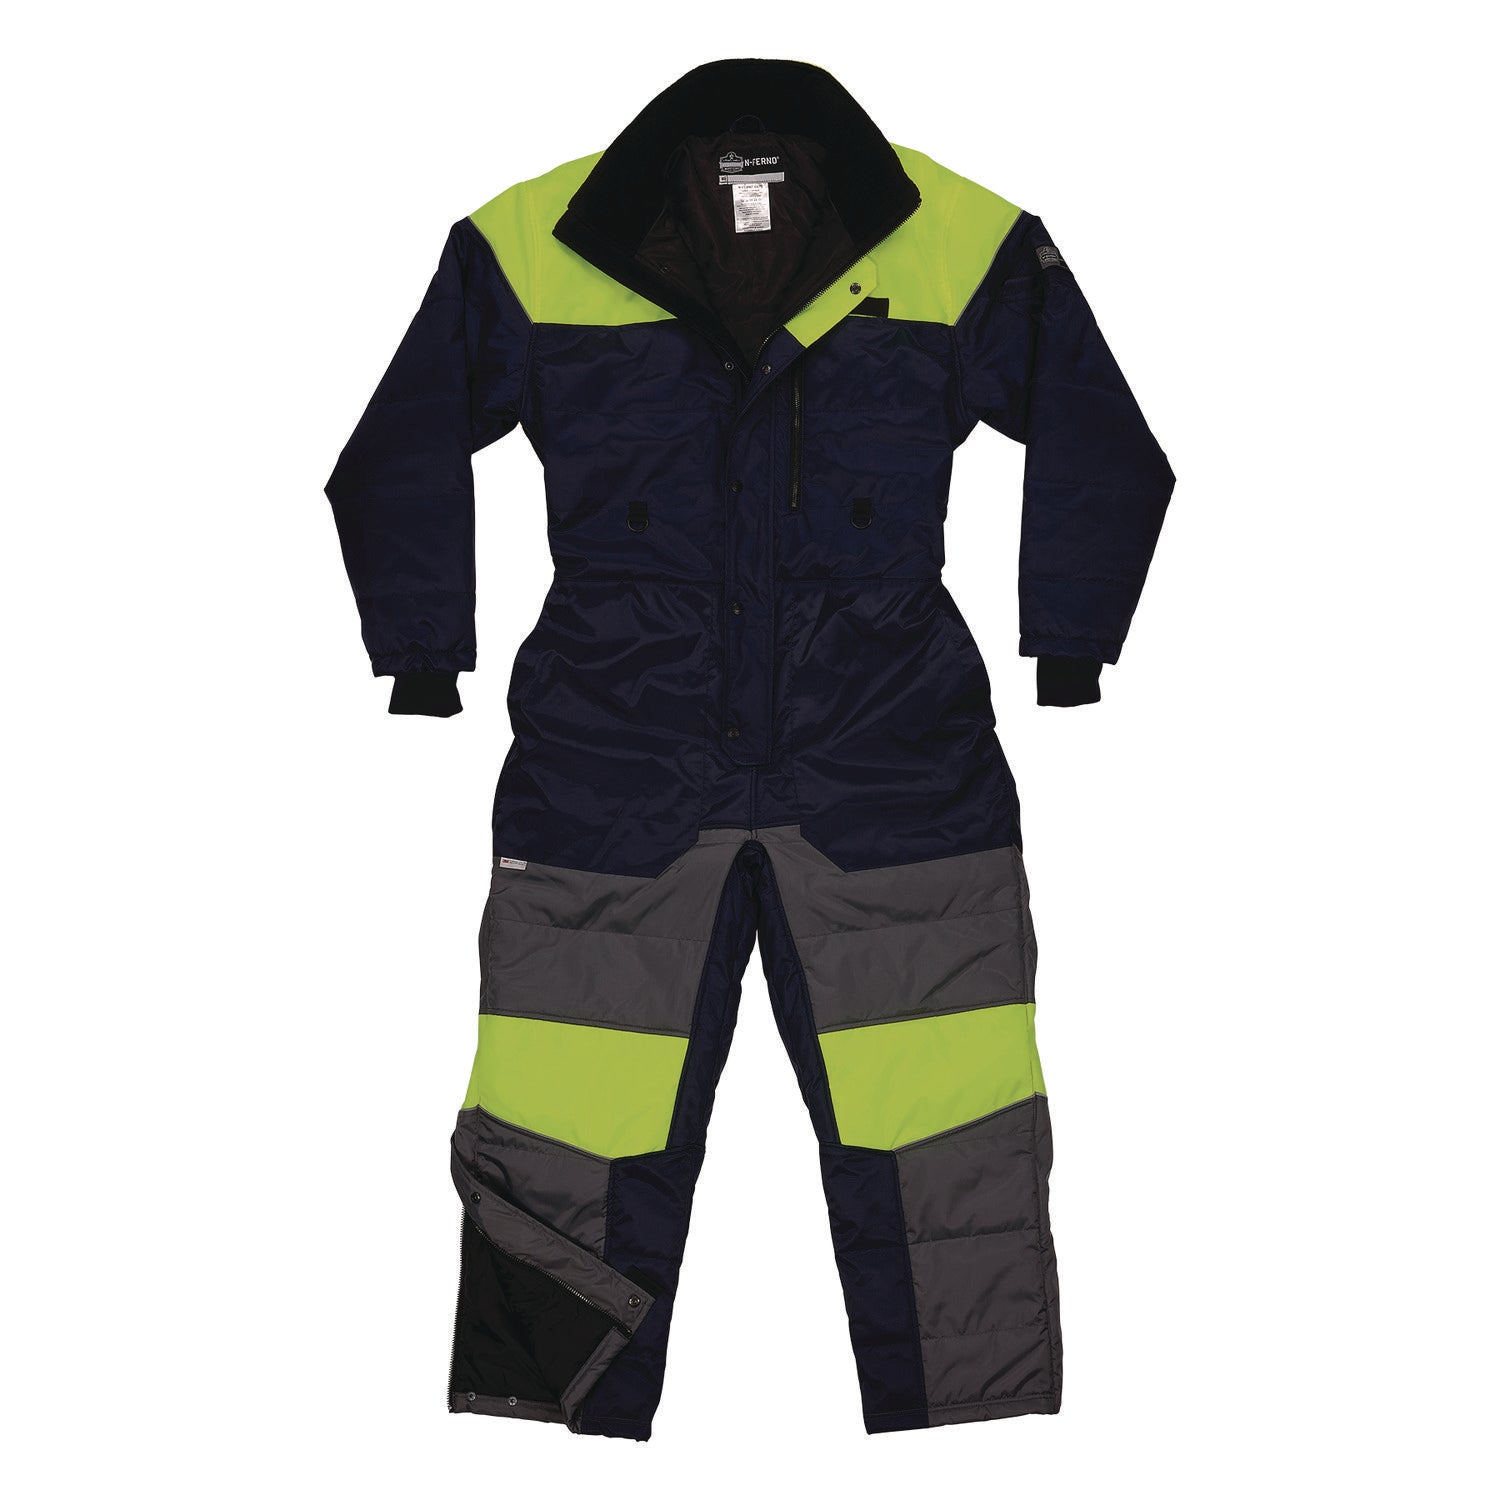 n-ferno-6475-insulated-freezer-coverall-4x-large-navy-ships-in-1-3-business-days_ego41248 - 1